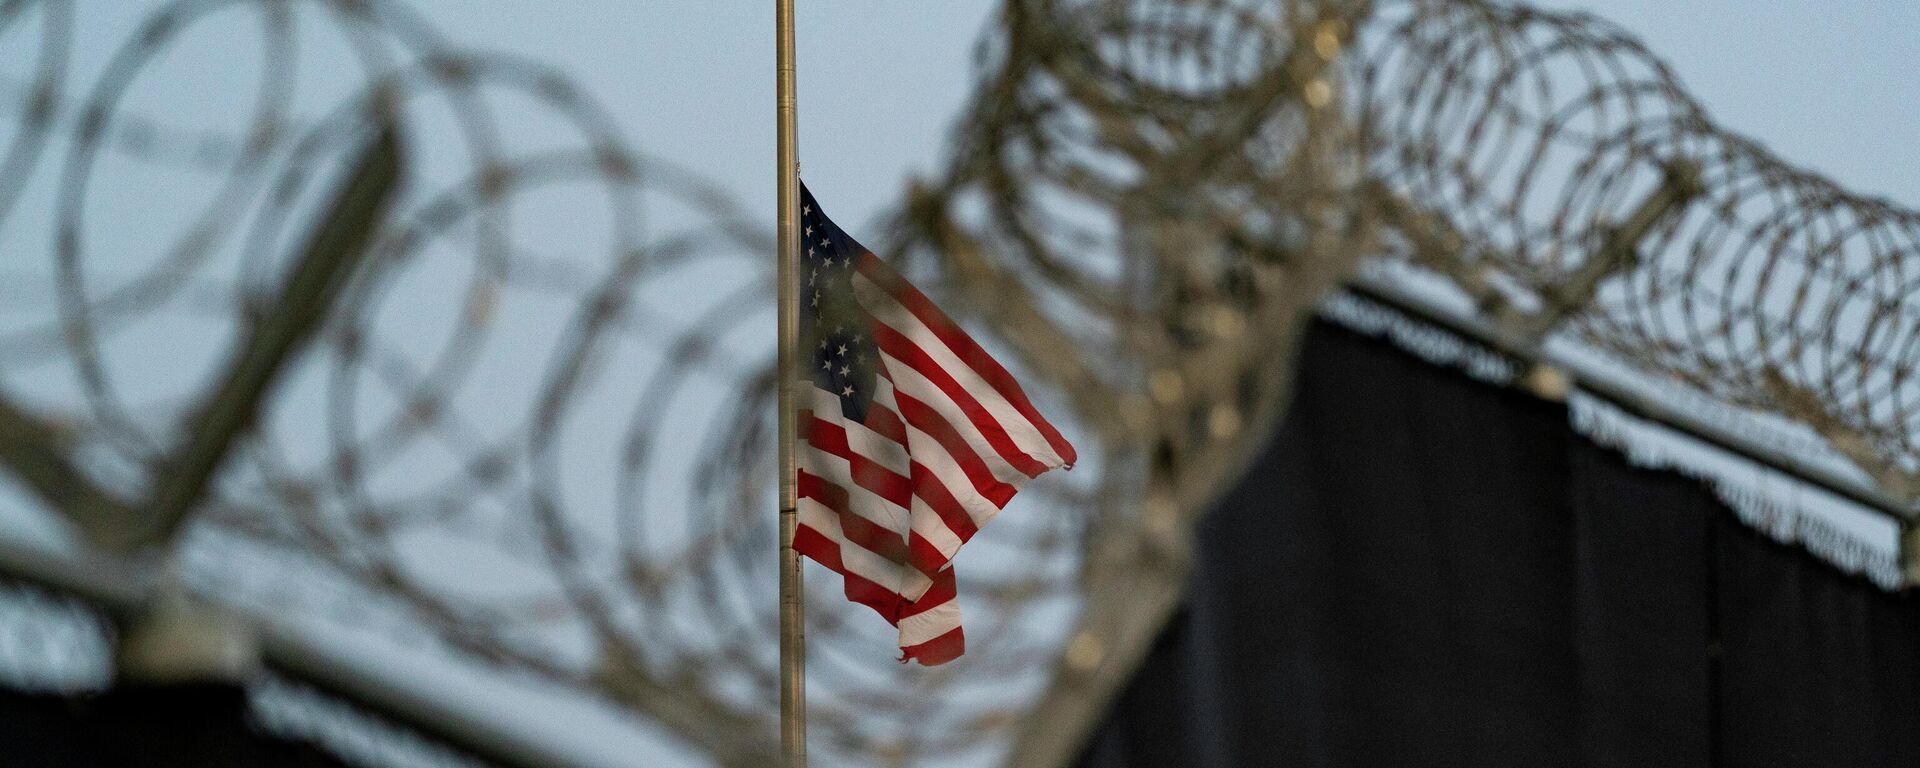 In this Aug. 29, 2021, file photo reviewed by U.S. military officials, a flag flies at half-staff in honor of the U.S. service members and other victims killed in the terrorist attack in Kabul, Afghanistan, as seen from Camp Justice in Guantanamo Bay Naval Base, Cuba. - Sputnik Africa, 1920, 19.05.2023